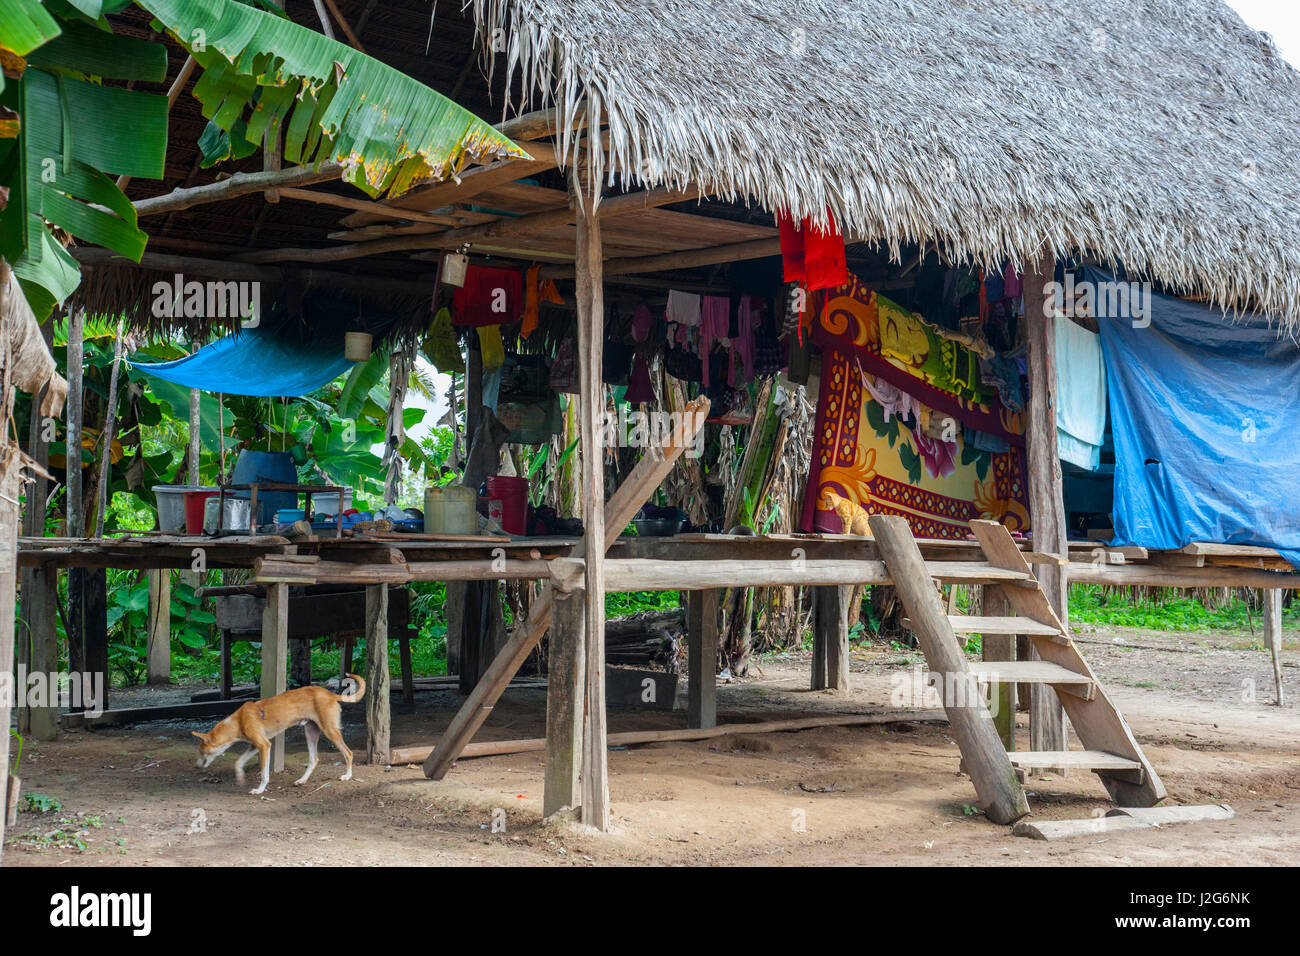 A typical home in the town of Puerta Miguel on the Yurapa River in the Amazon Rainforest of Peru. Stock Photo